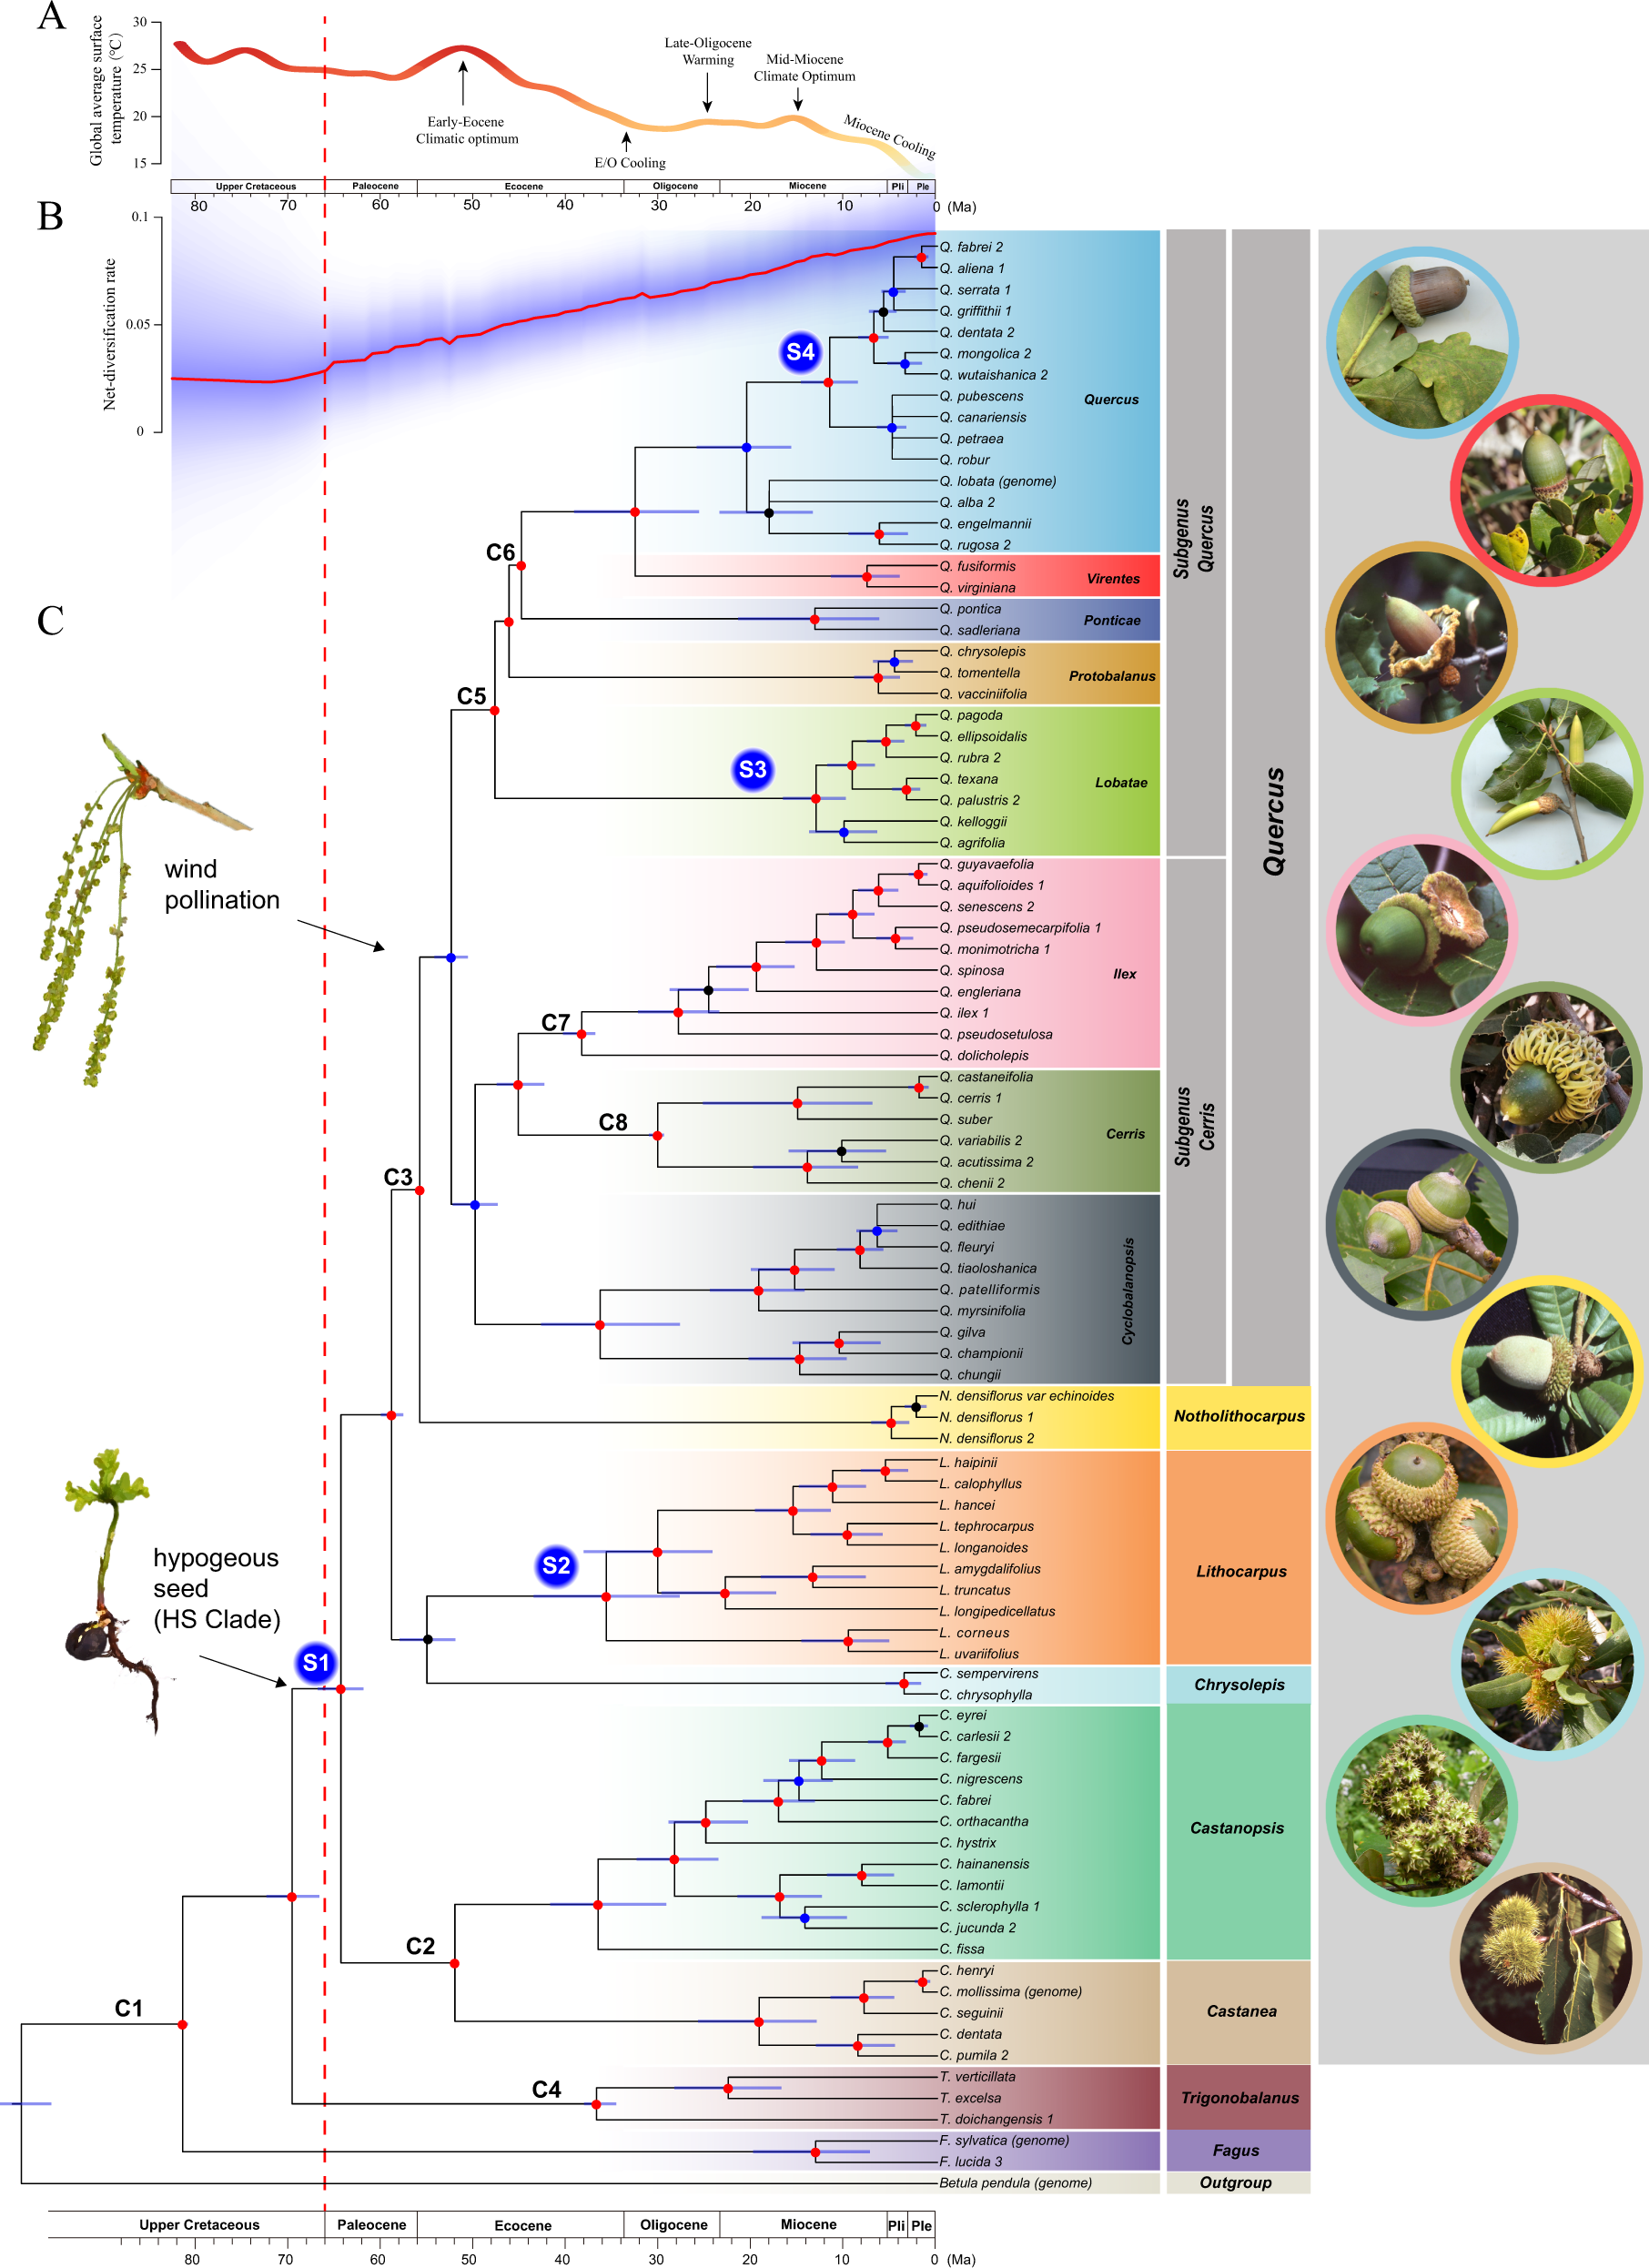 Under The Oak Tree Ch 26 Phylogenomic analyses highlight innovation and introgression in the  continental radiations of Fagaceae across the Northern Hemisphere | Nature  Communications